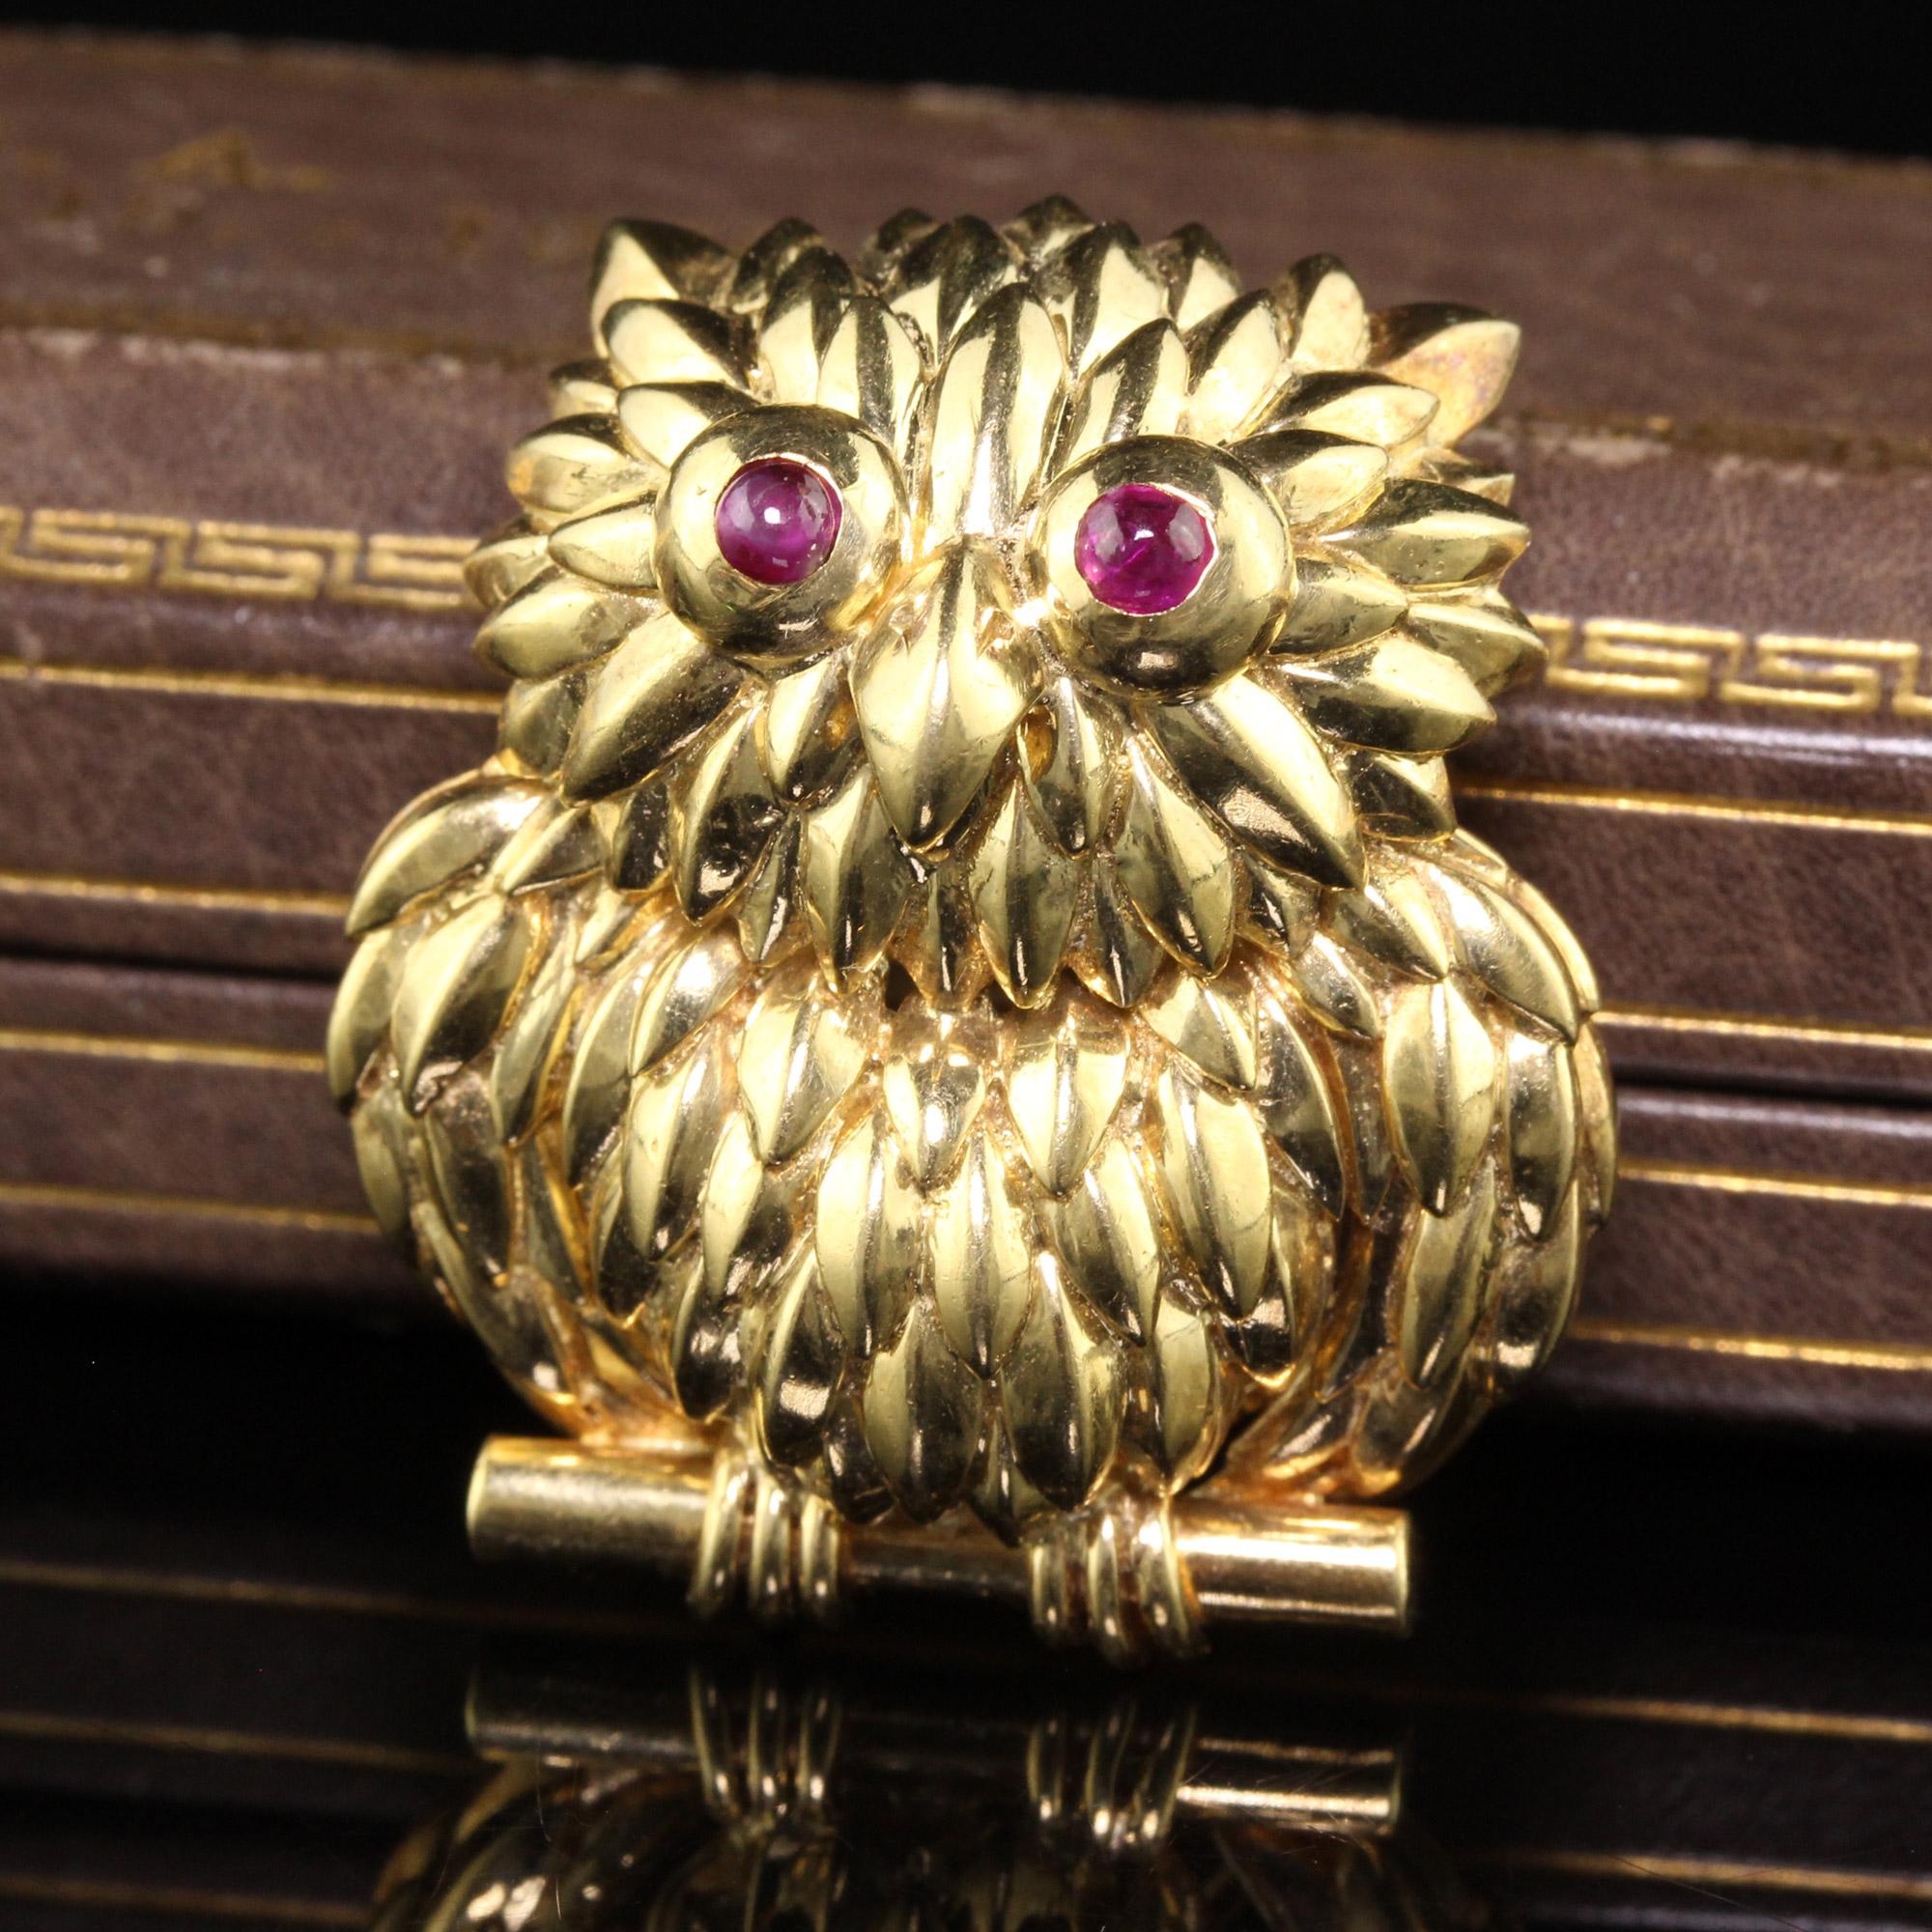 Beautiful Vintage Tiffany and Co 18K Yellow Gold Ruby Owl Brooch Pin. This gorgeous pin is crafted in 18k yellow gold. This gorgeous pin has genuine ruby eyes and has gorgeous craftsmanship as each feather looks to be put on individually during the